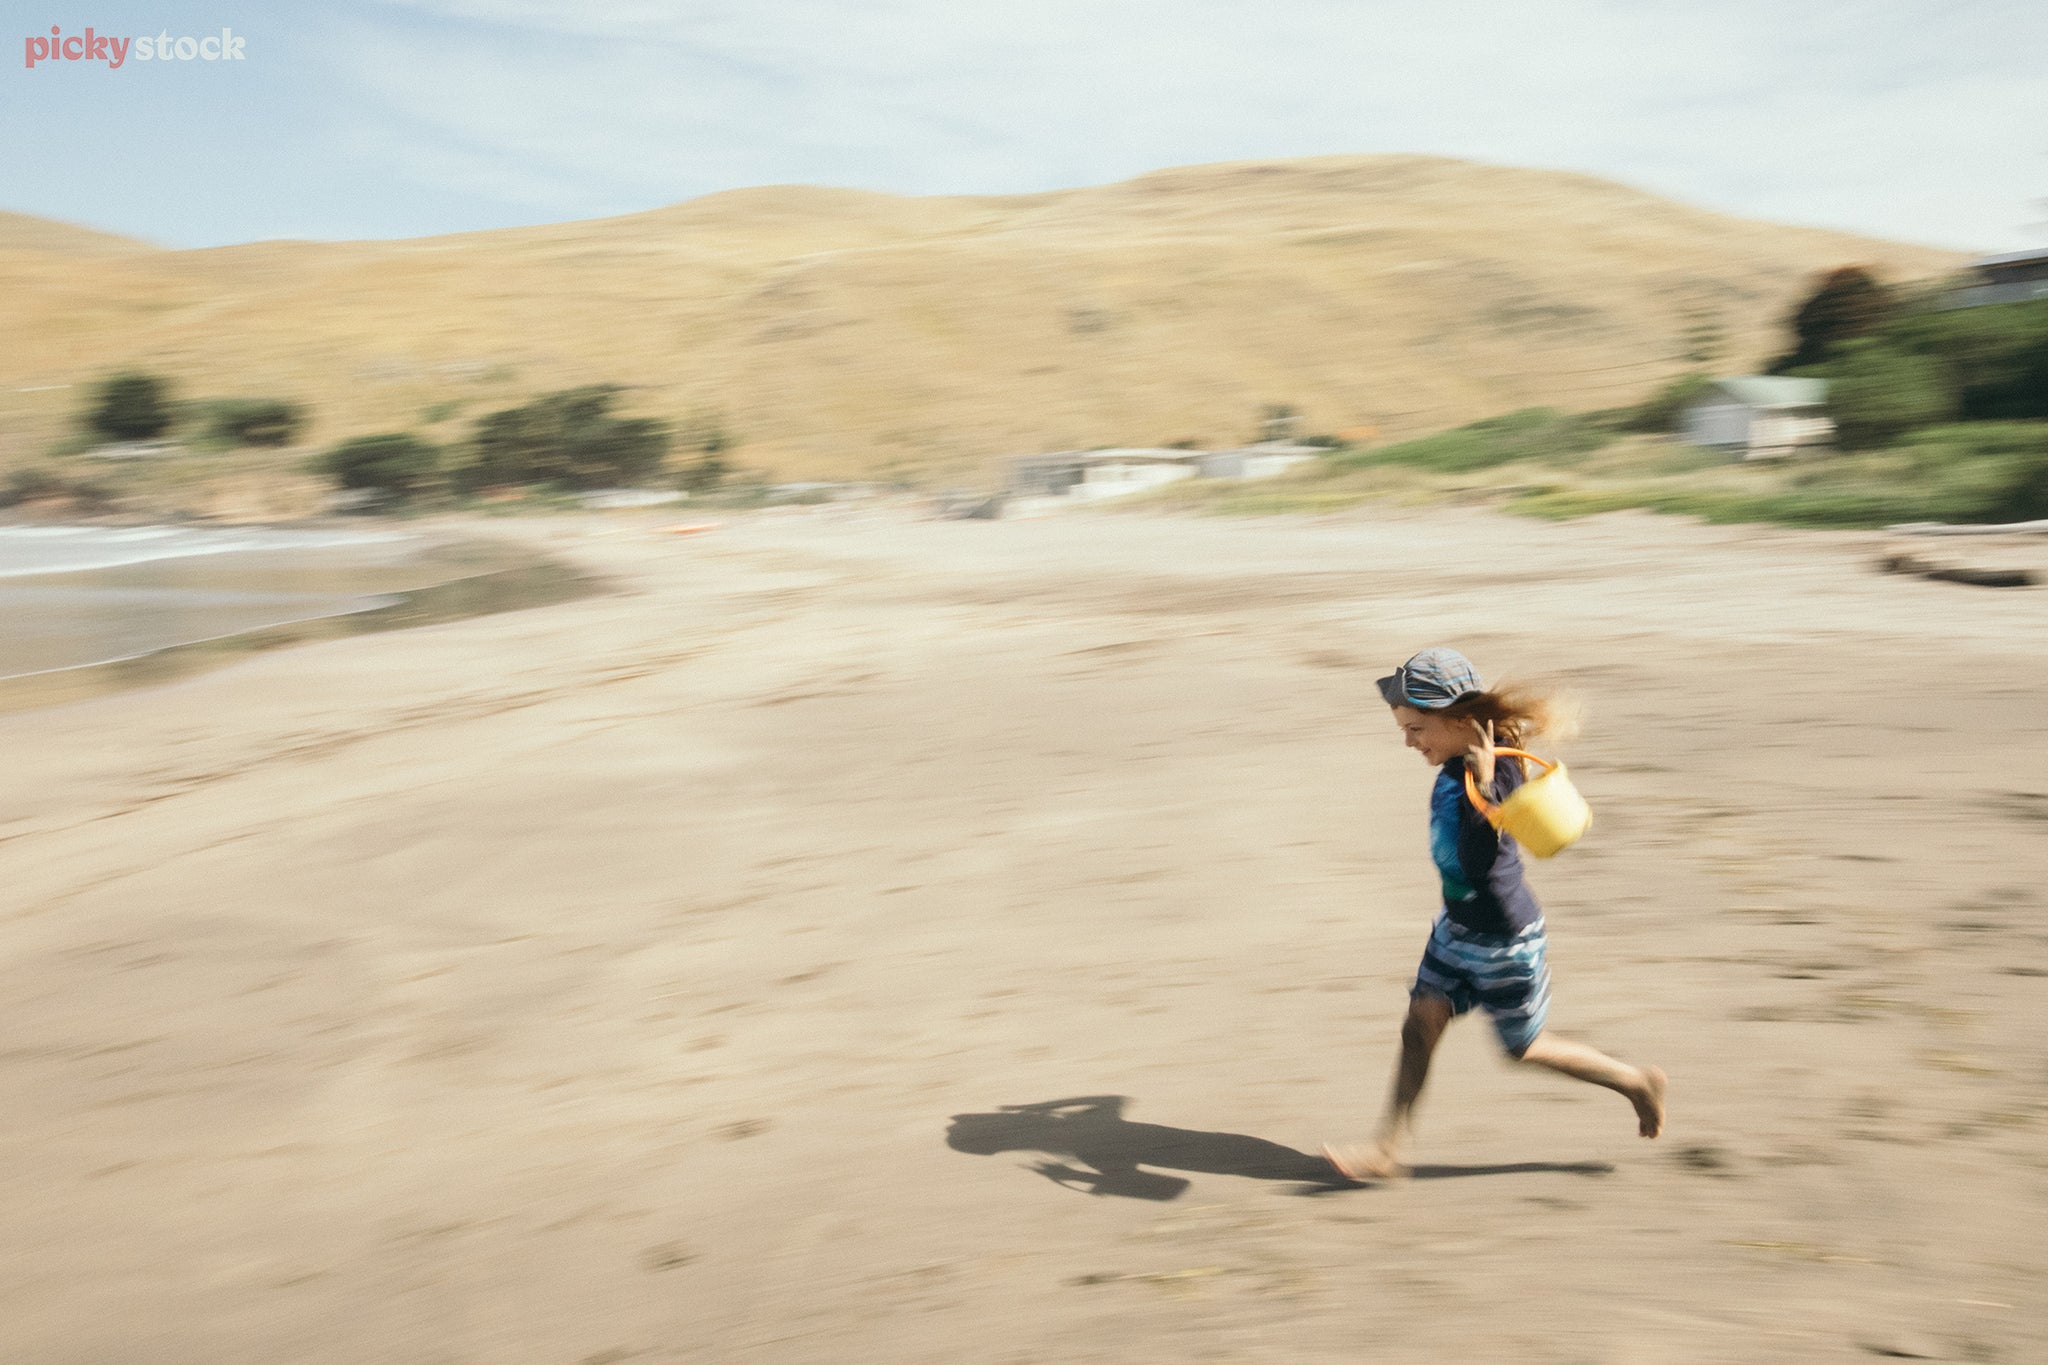 Child speedily runs along beach to water carrying a bright yellow bucket. Image has a motion blurr. Background is a soft beach day, blue summer sky. 